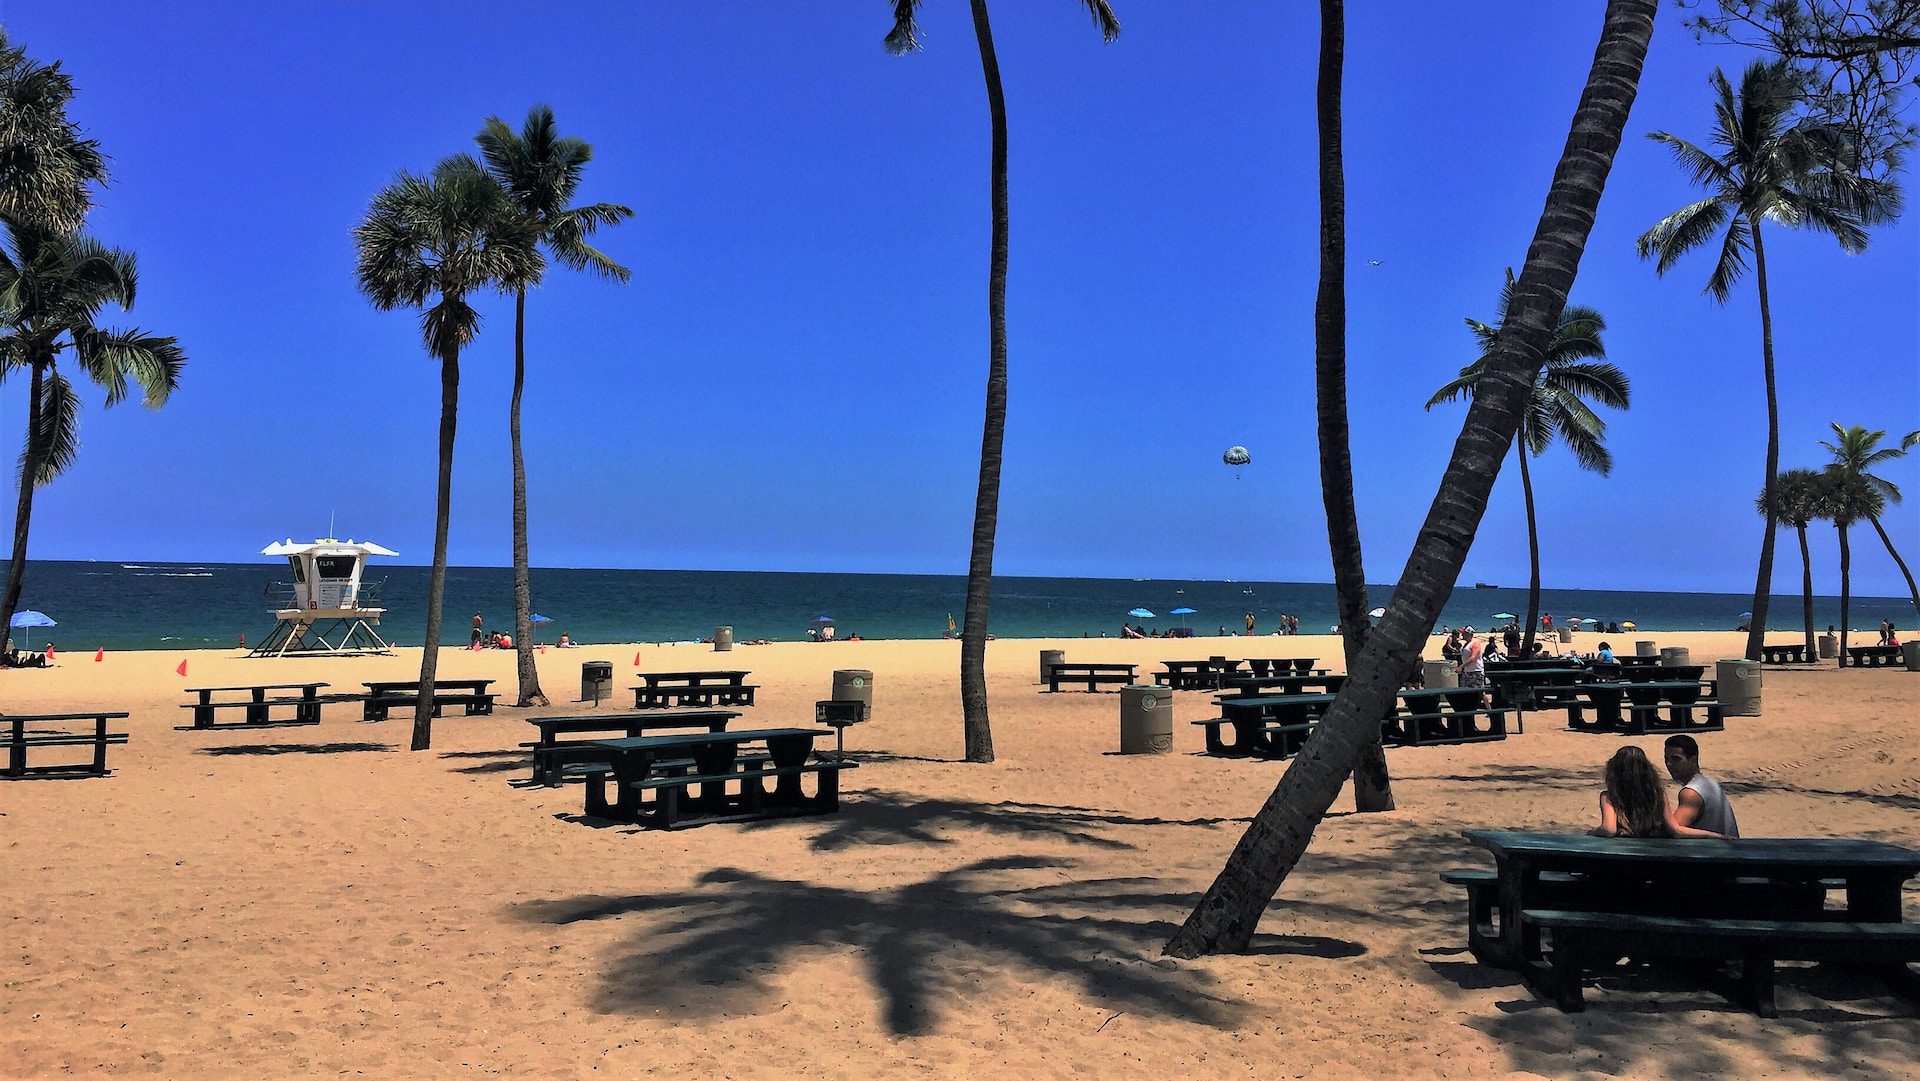 Beach with palm trees in Ft. Lauderdale, Florida.